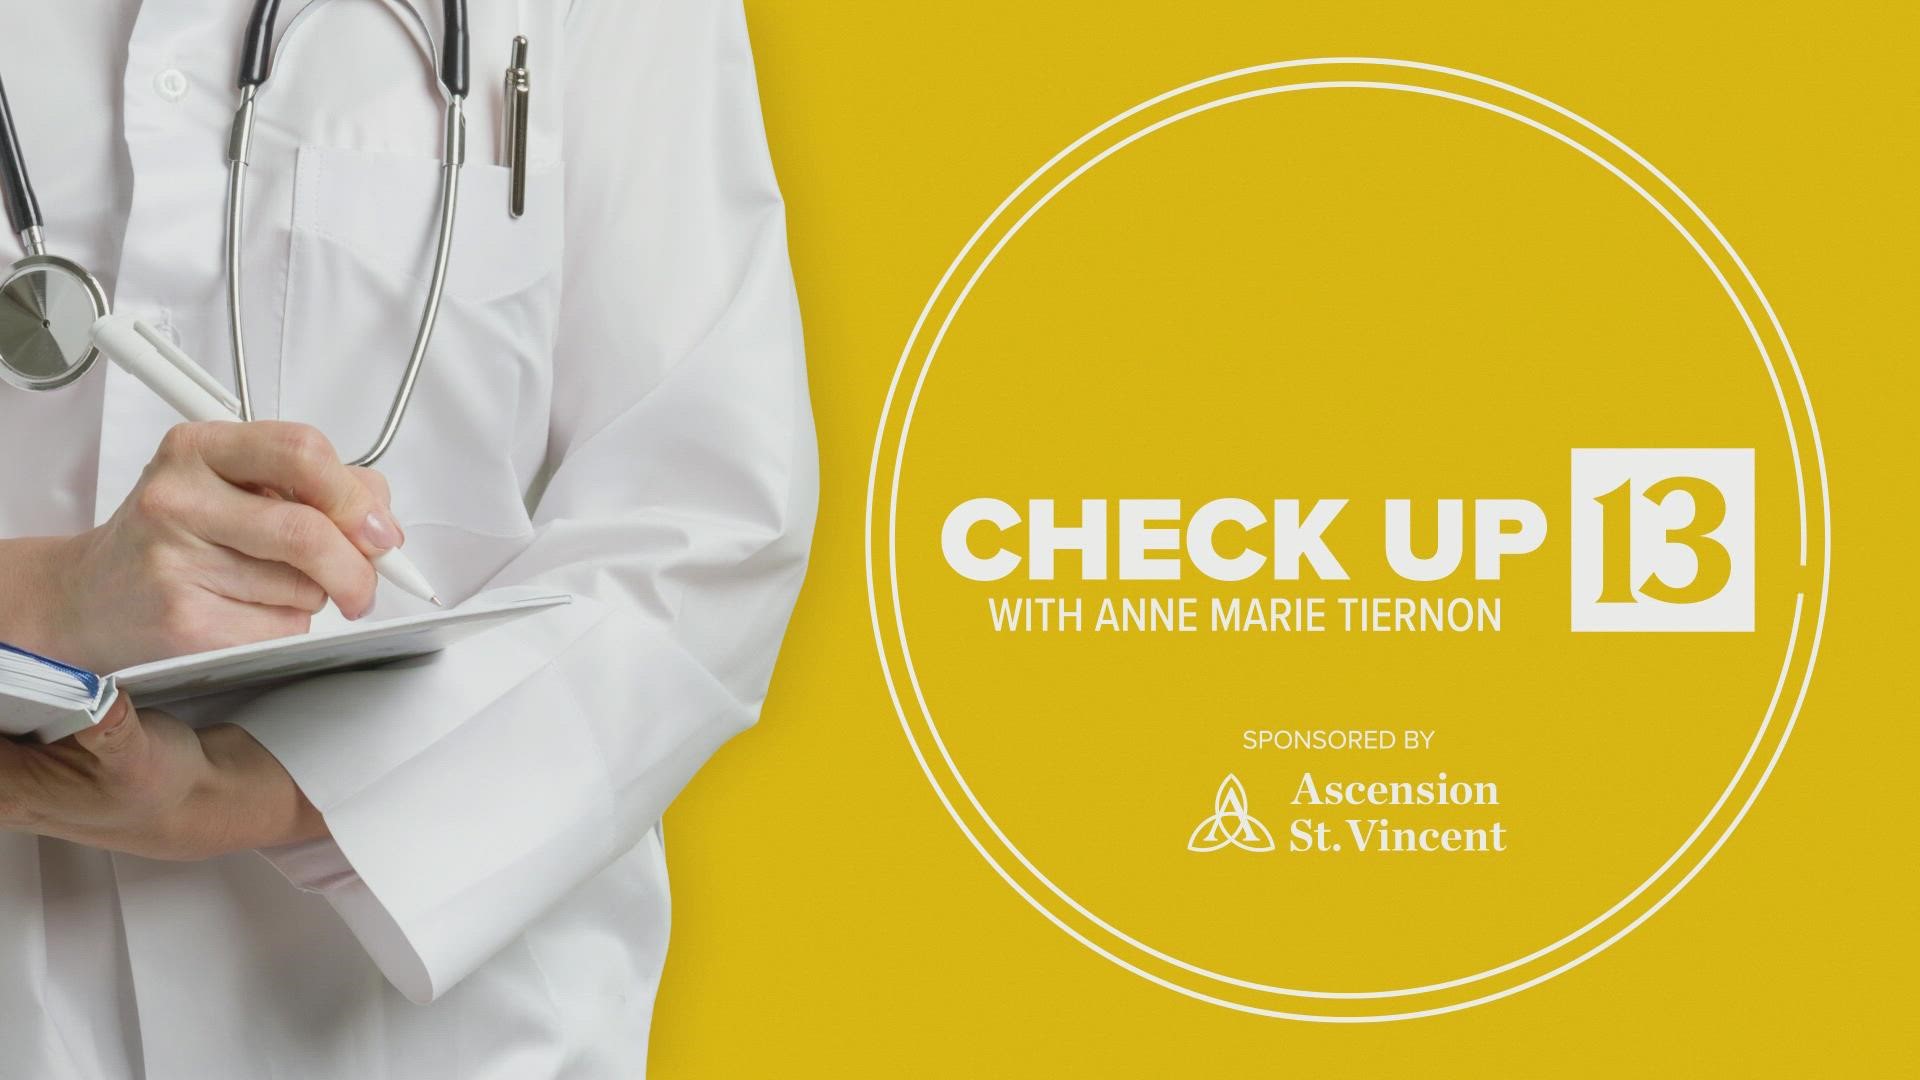 This month's Check Up 13 is focused on making sure women are up to date on their annual mammogram.